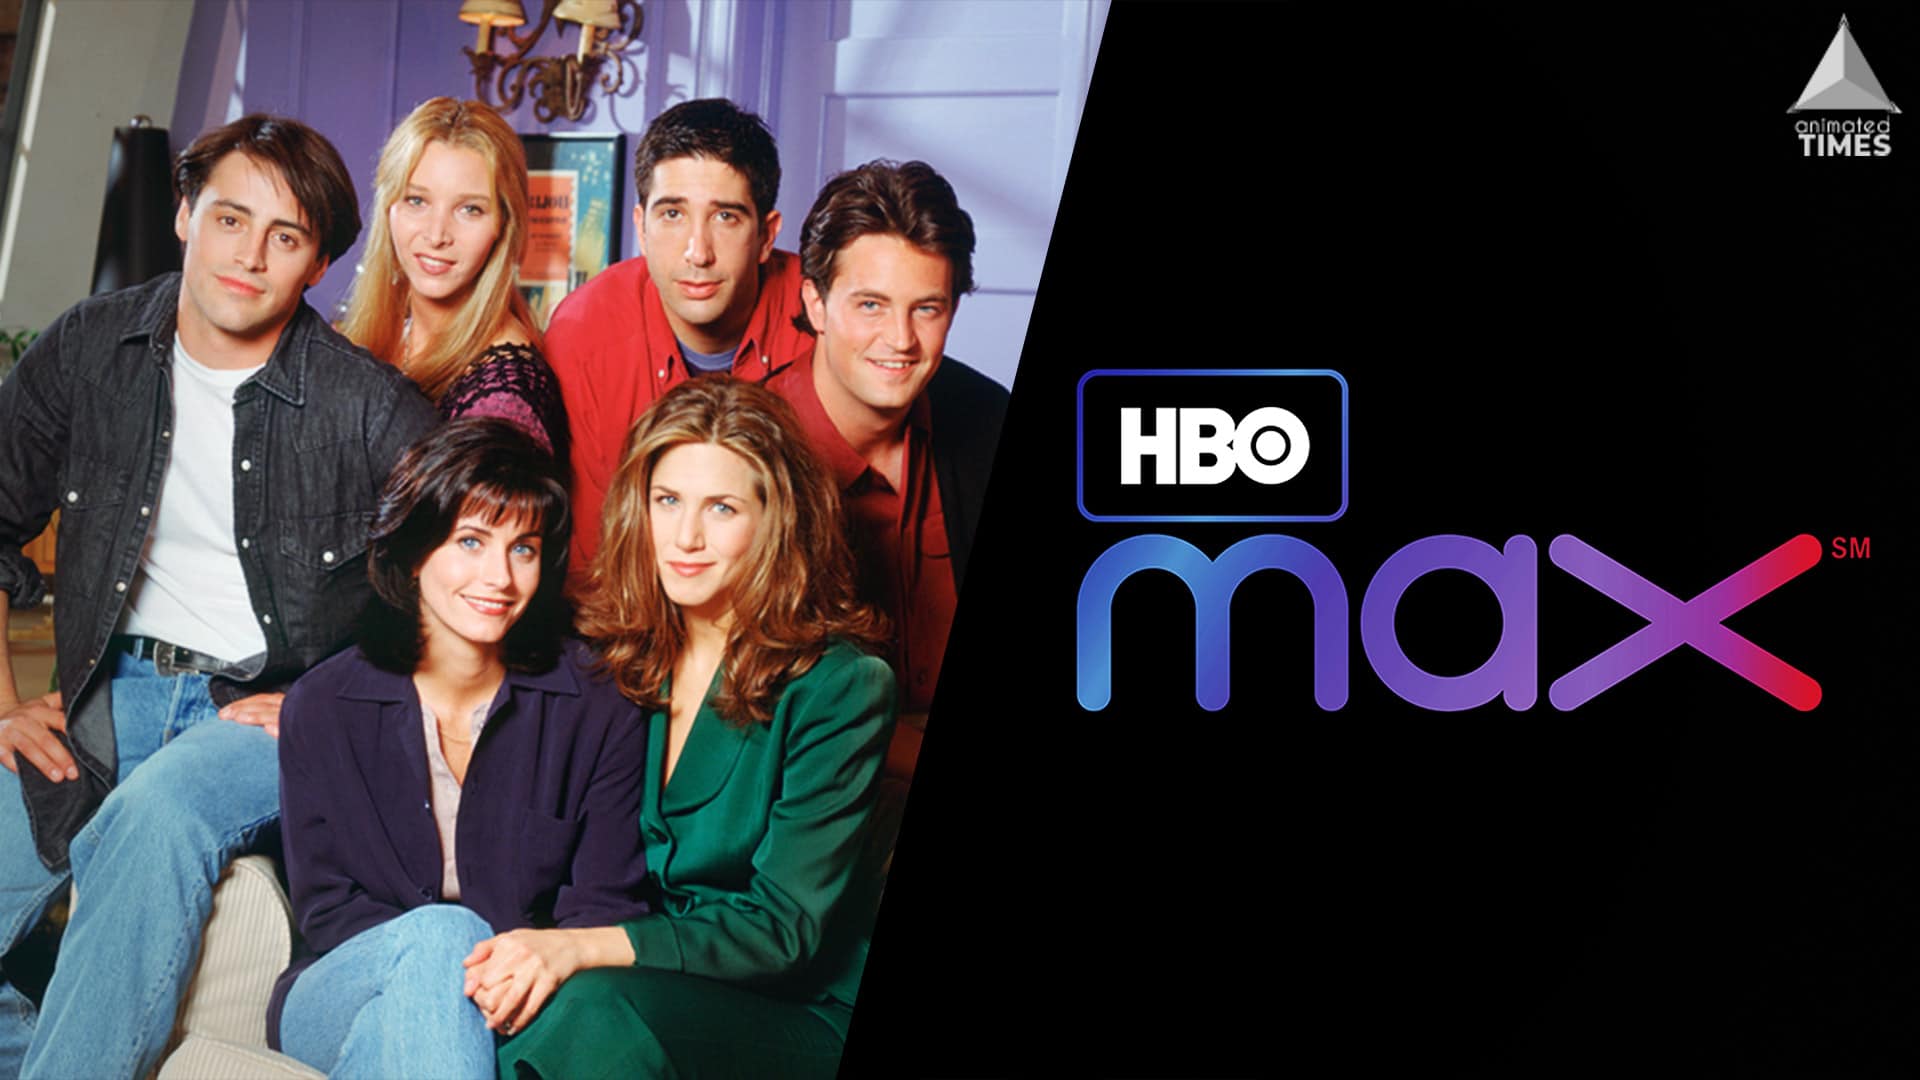 Friends Reunion With HBO Max Could Add A Little Dash of Color To The Show